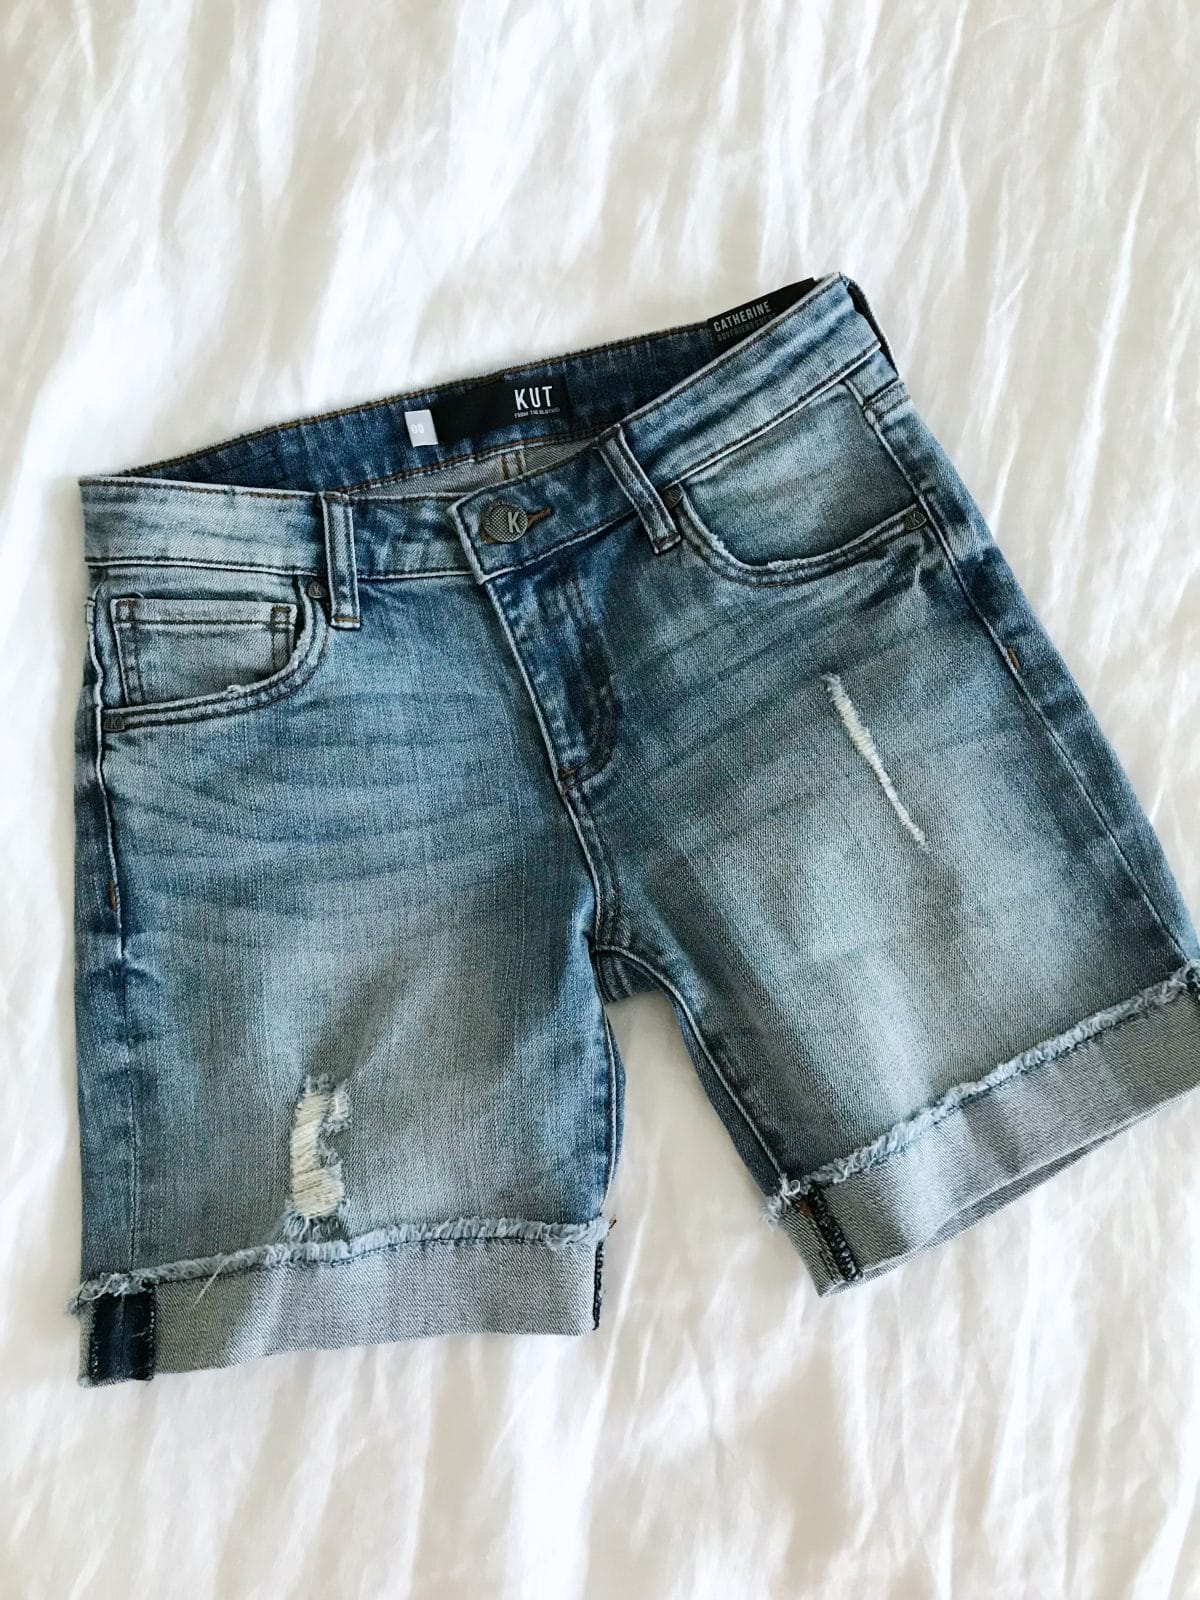 best jean shorts for summer kut from the kloth